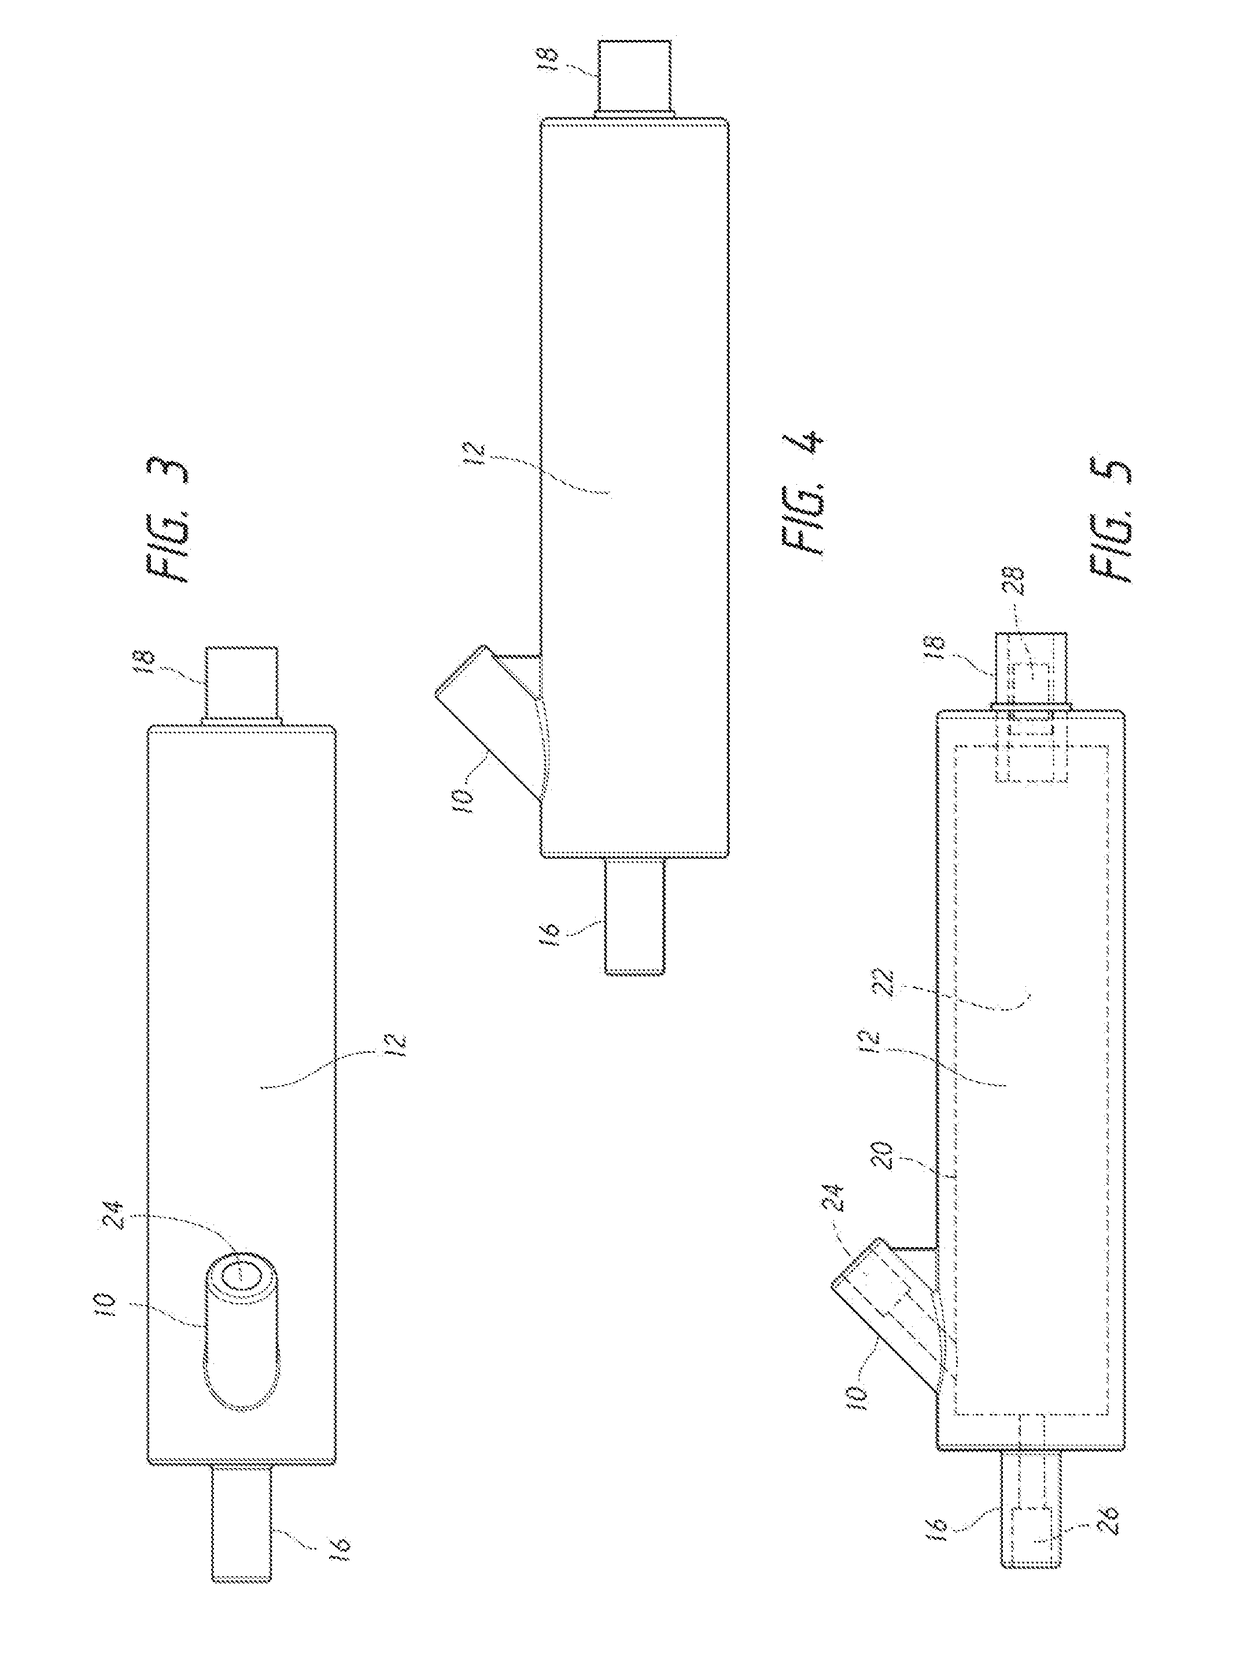 Gas Removal Apparatus and Related Methods